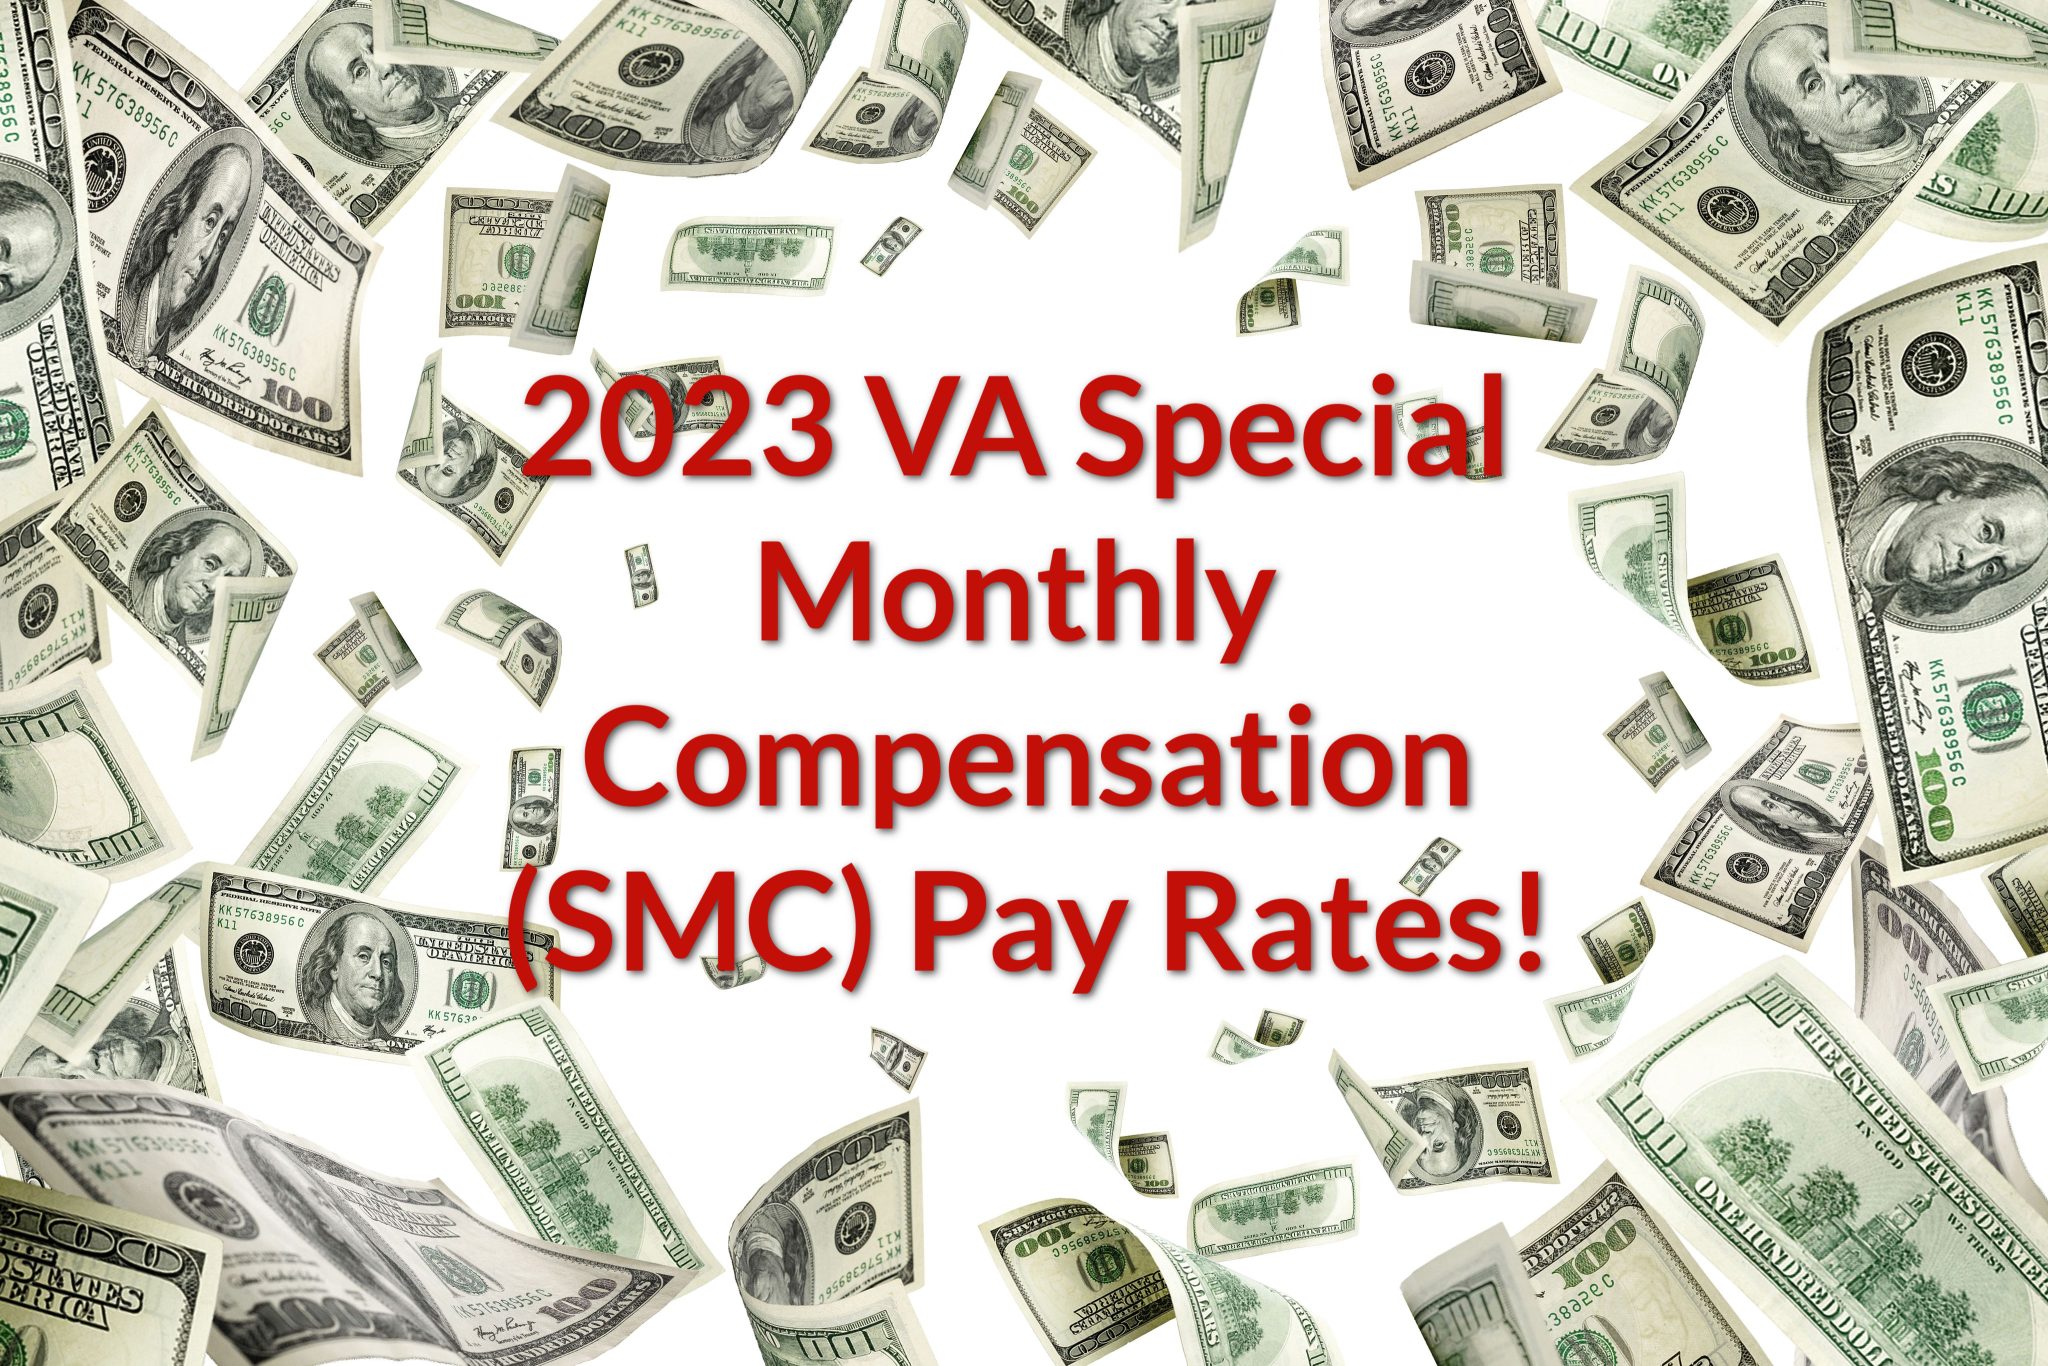 2023 VA Special Monthly Compensation (SMC) Pay Rates